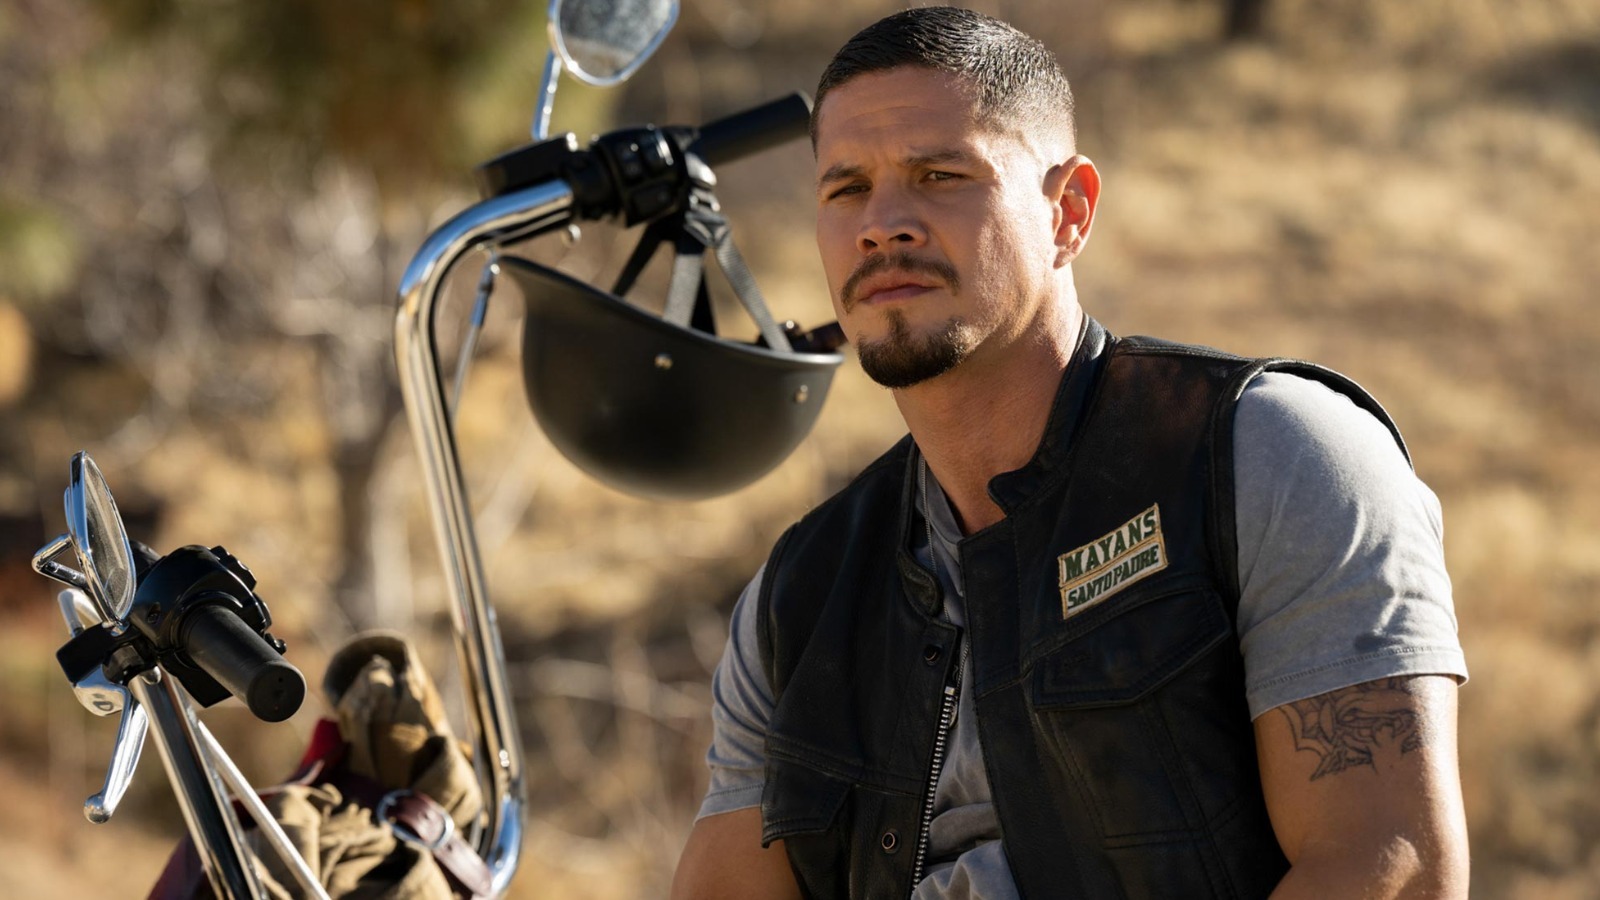 Mayans M.C. Season 4 Release Date, Cast, And More